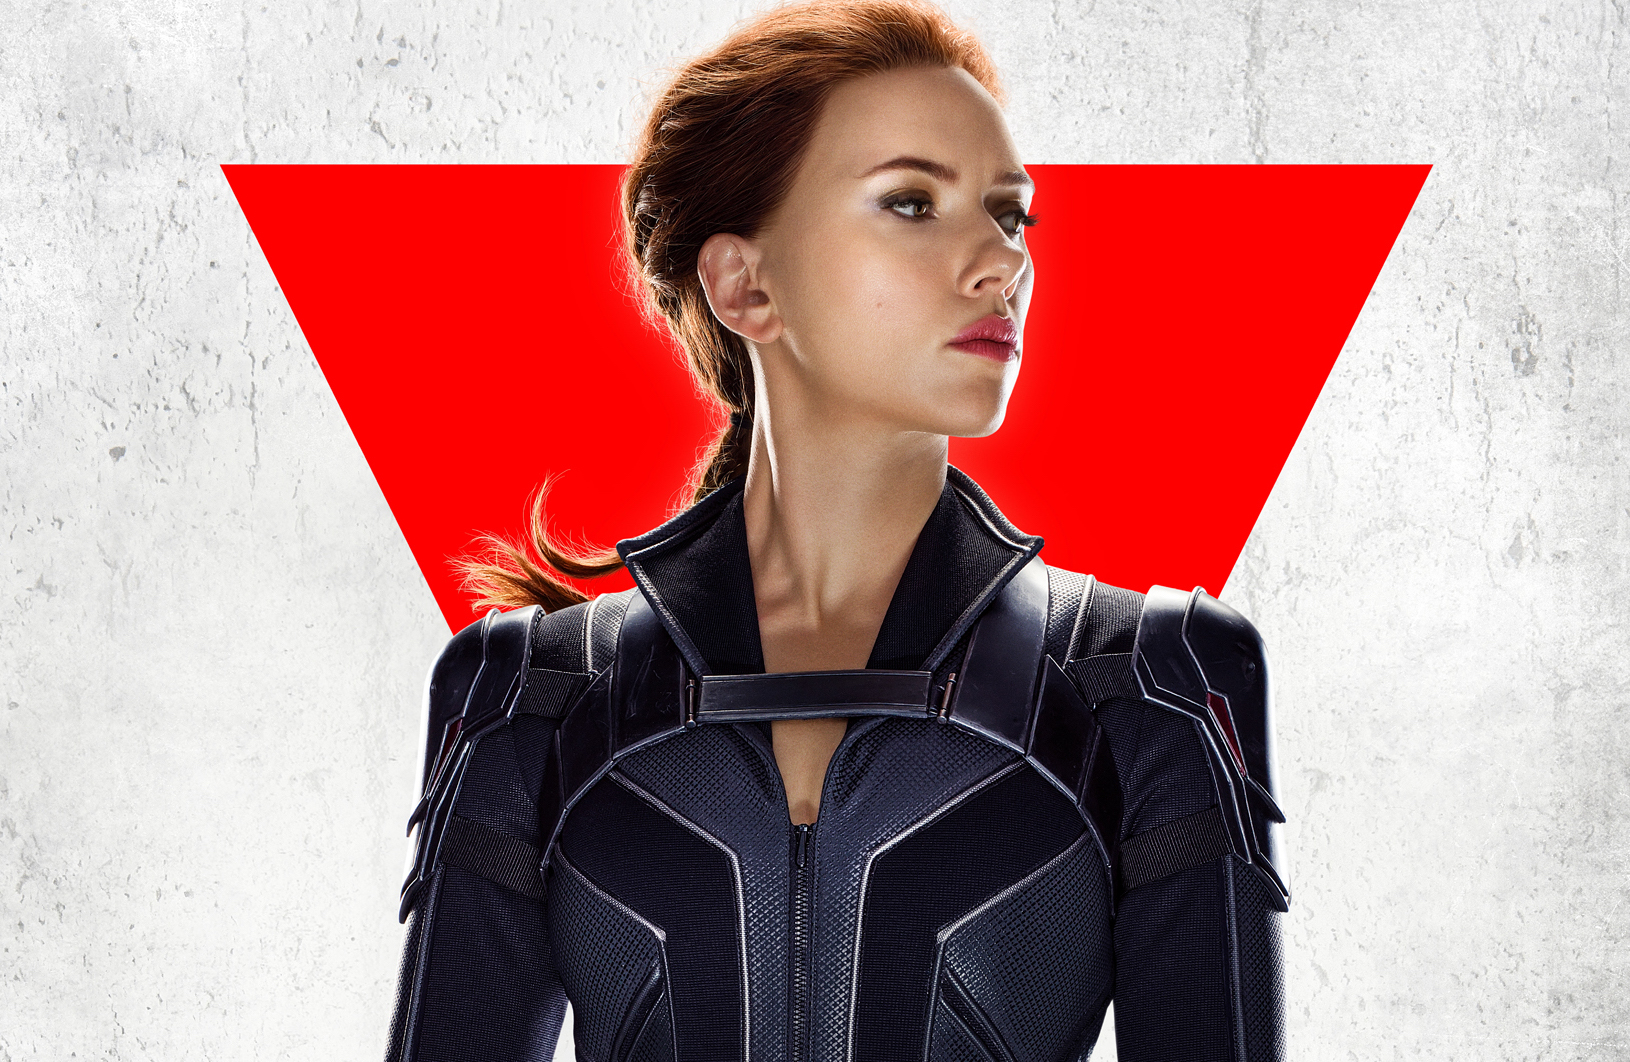 Fans React To 'Black Widow' After It Was Finally Released In Theaters